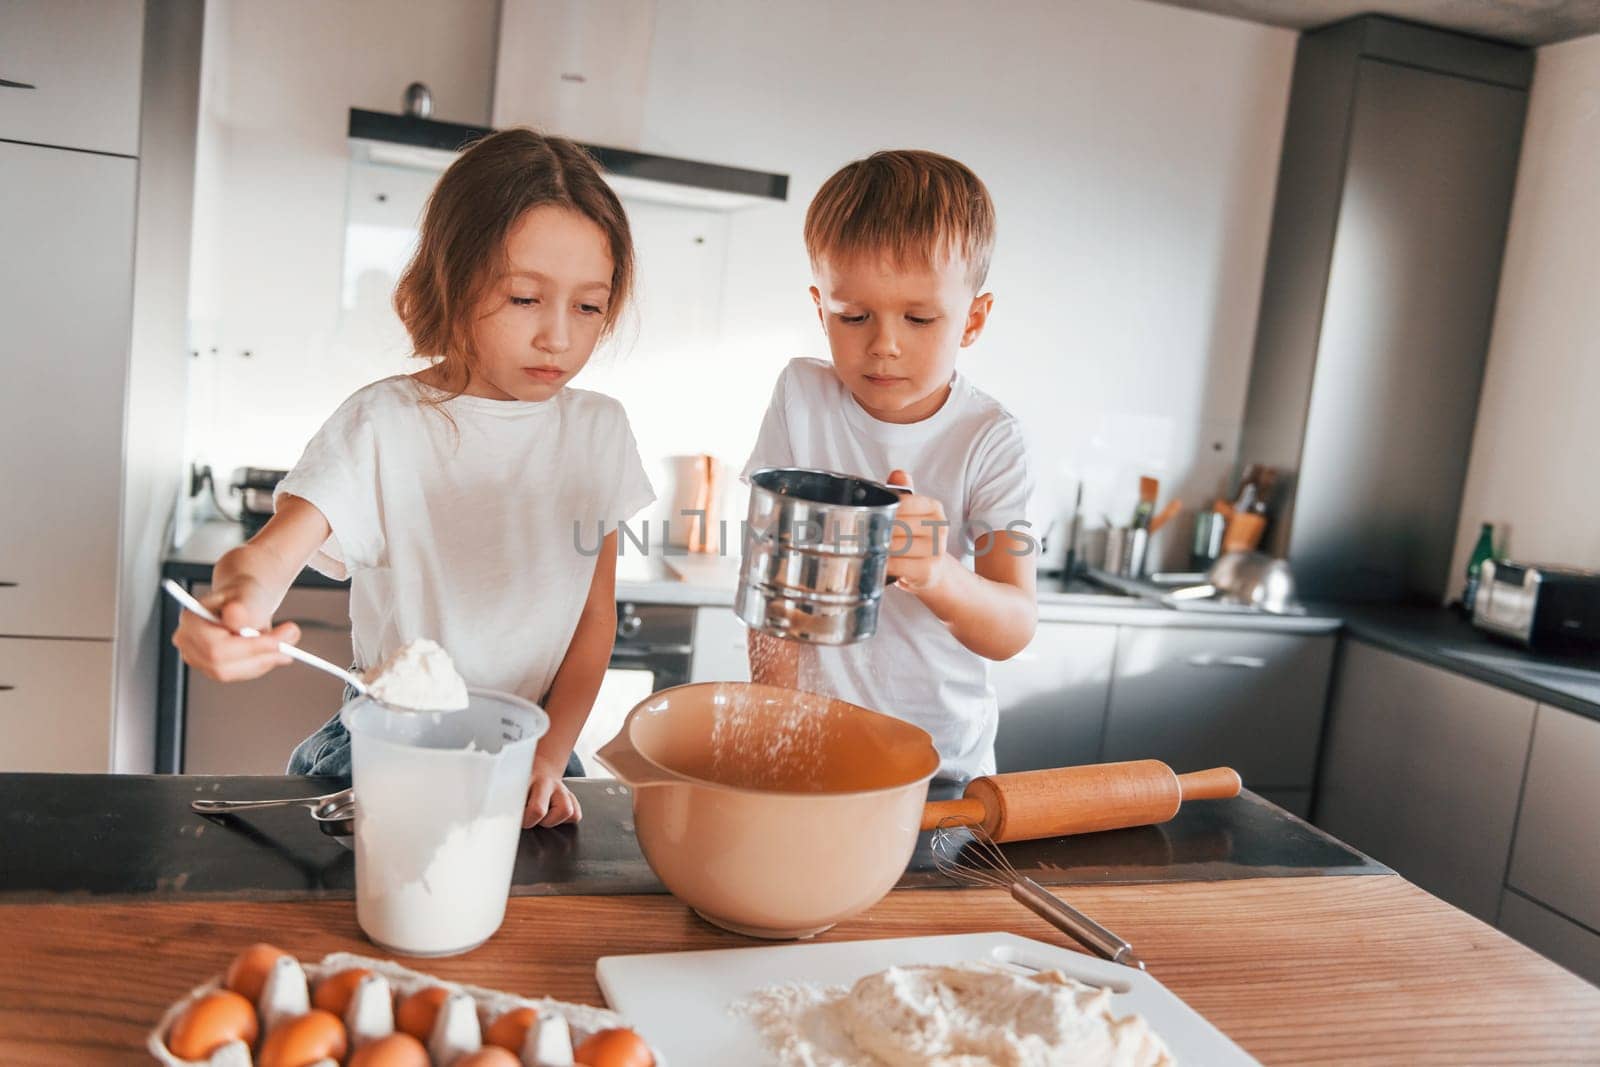 New year anticipation. Little boy and girl preparing Christmas cookies on the kitchen by Standret